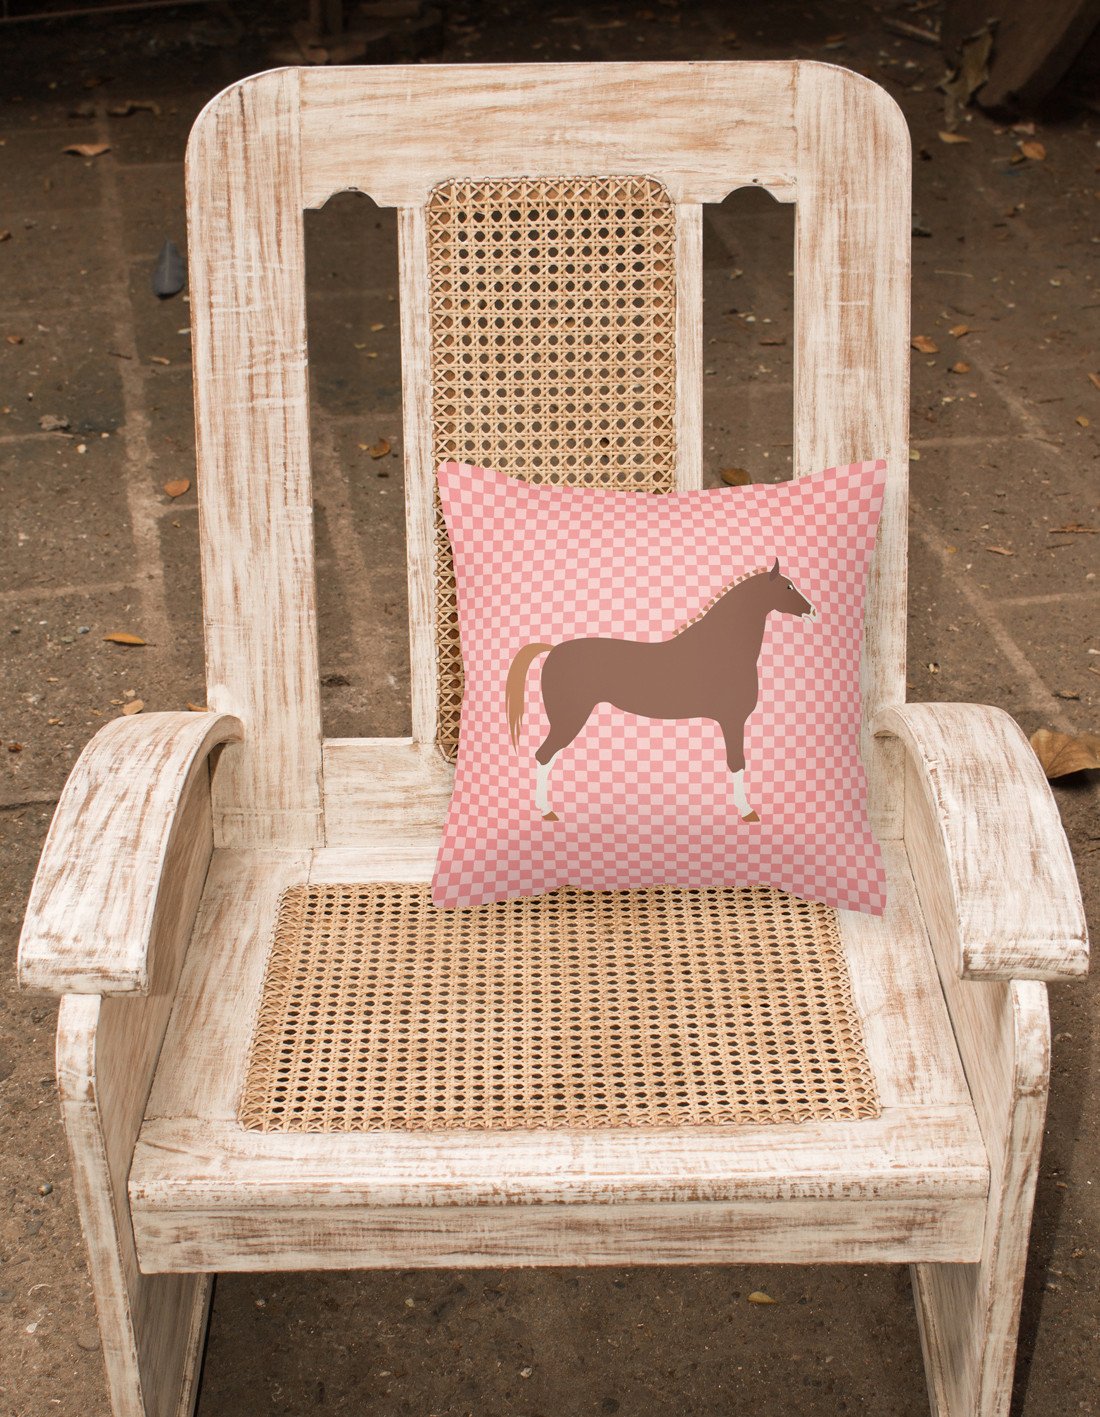 Hannoverian Horse Pink Check Fabric Decorative Pillow BB7909PW1818 by Caroline's Treasures